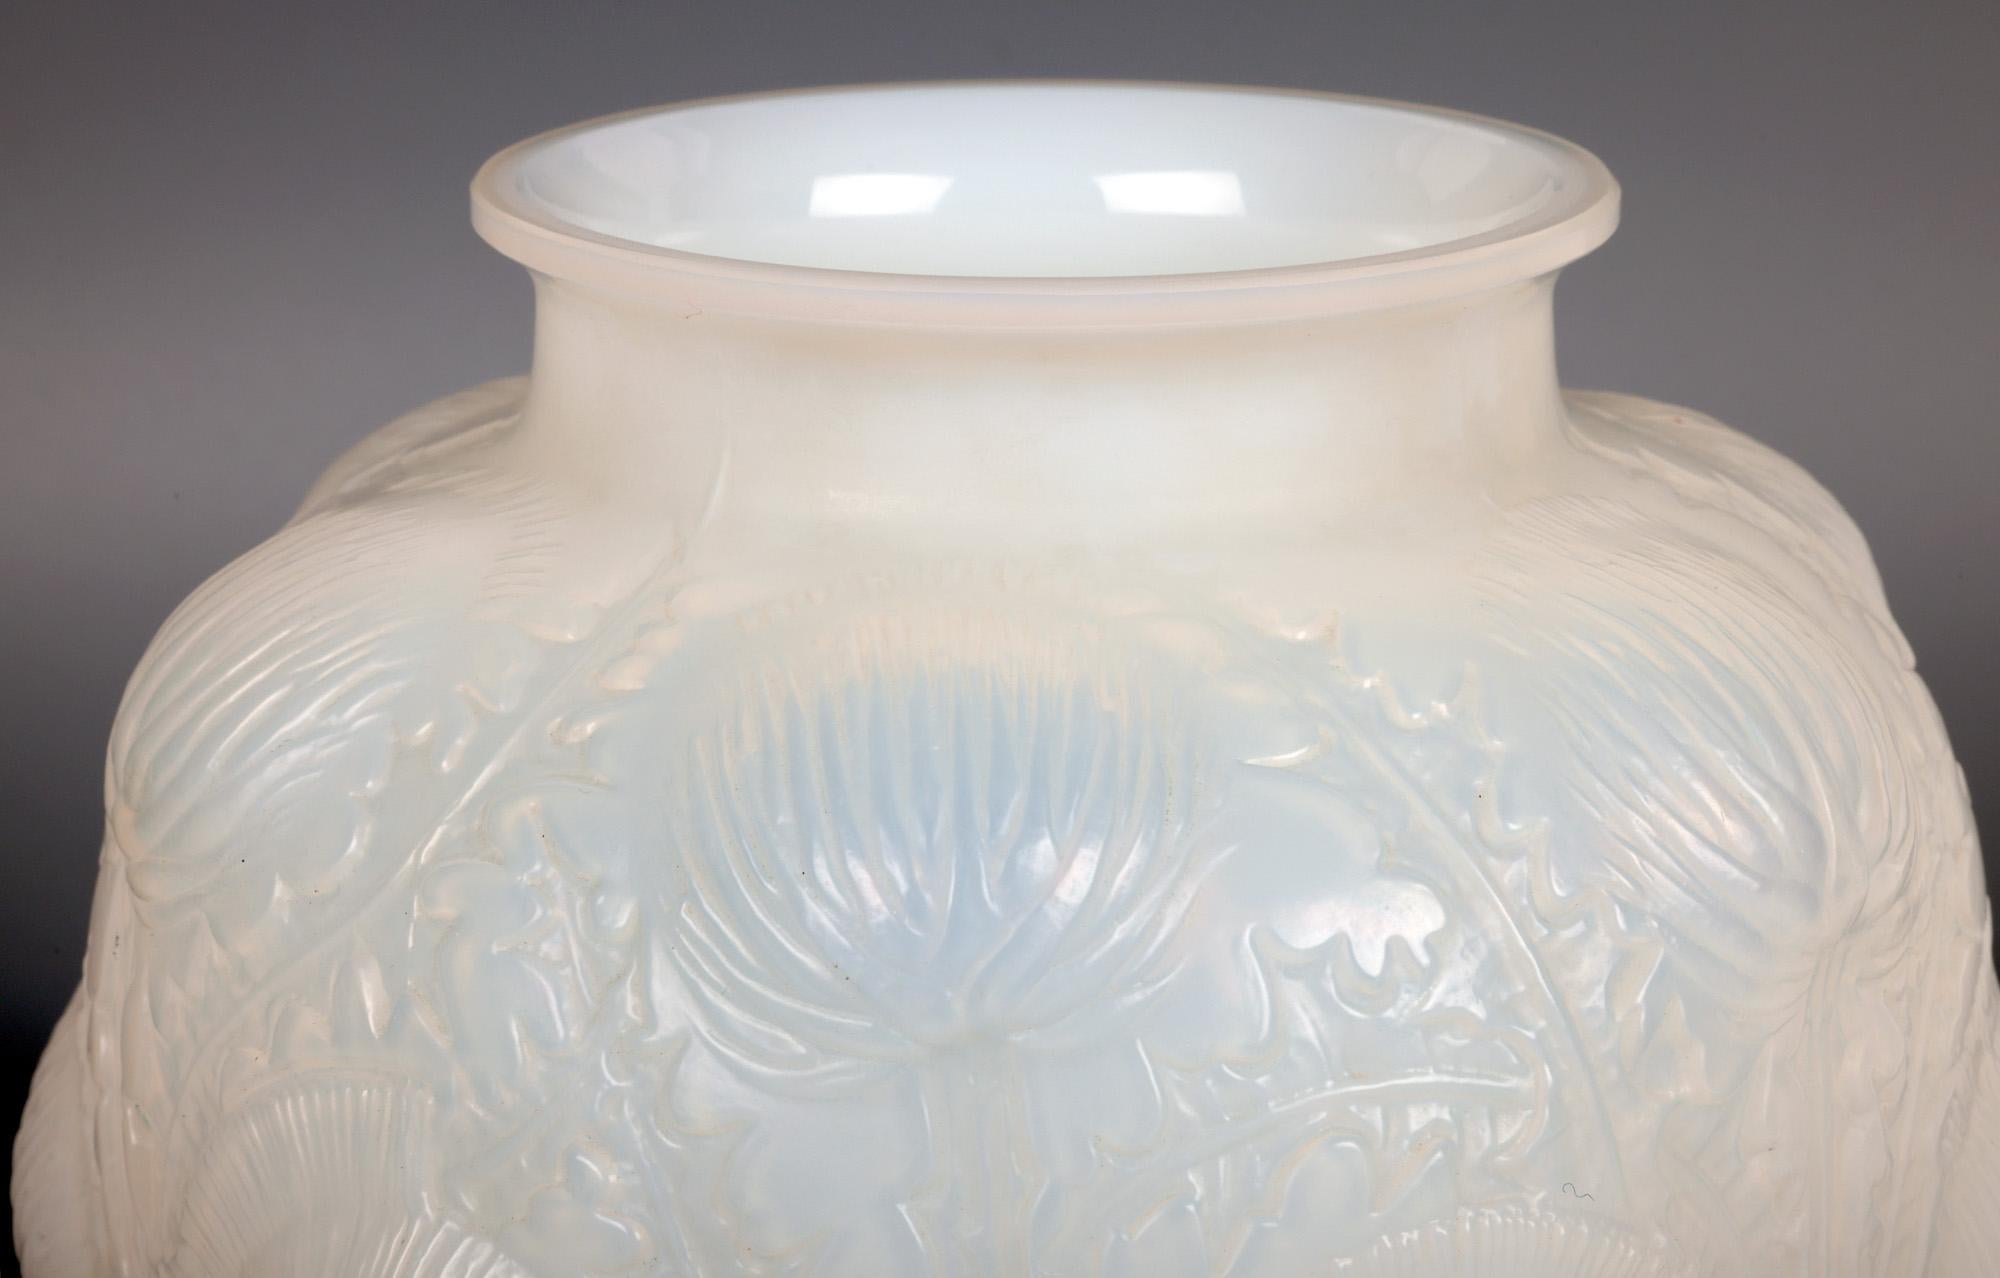 A stunning early Domrémy (created 1926) Art Glass Vase in wonderful opalescent glass by René Lalique (French, 1860-1945) and dating from around 1926. The vase stands on a narrow flat round polished foot rim with a recessed base and is decorated with